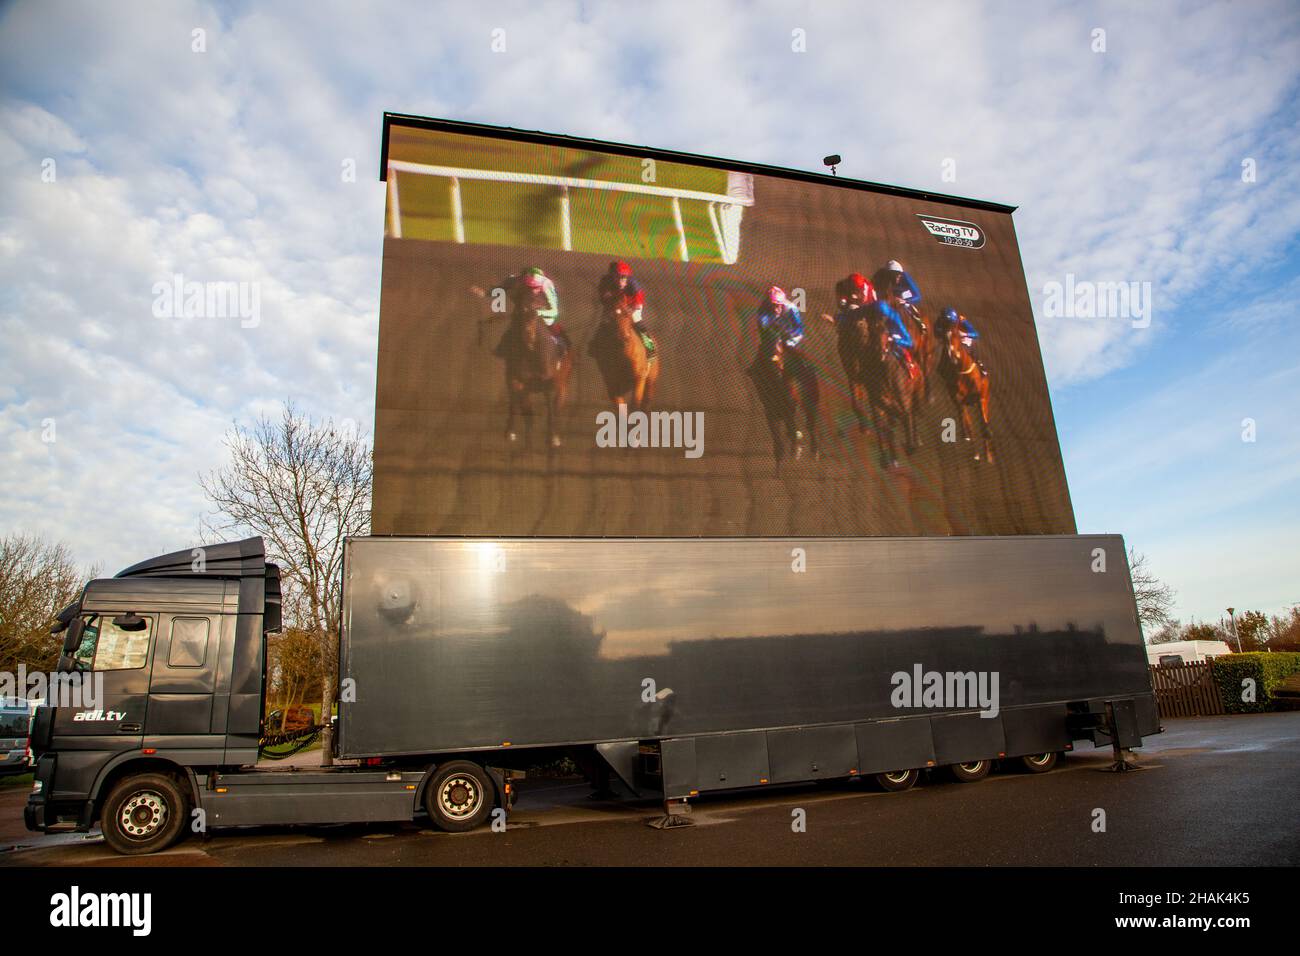 Outside broadcast of horse racing being shown on a large mobile screen at  Warwick racecourse England Stock Photo